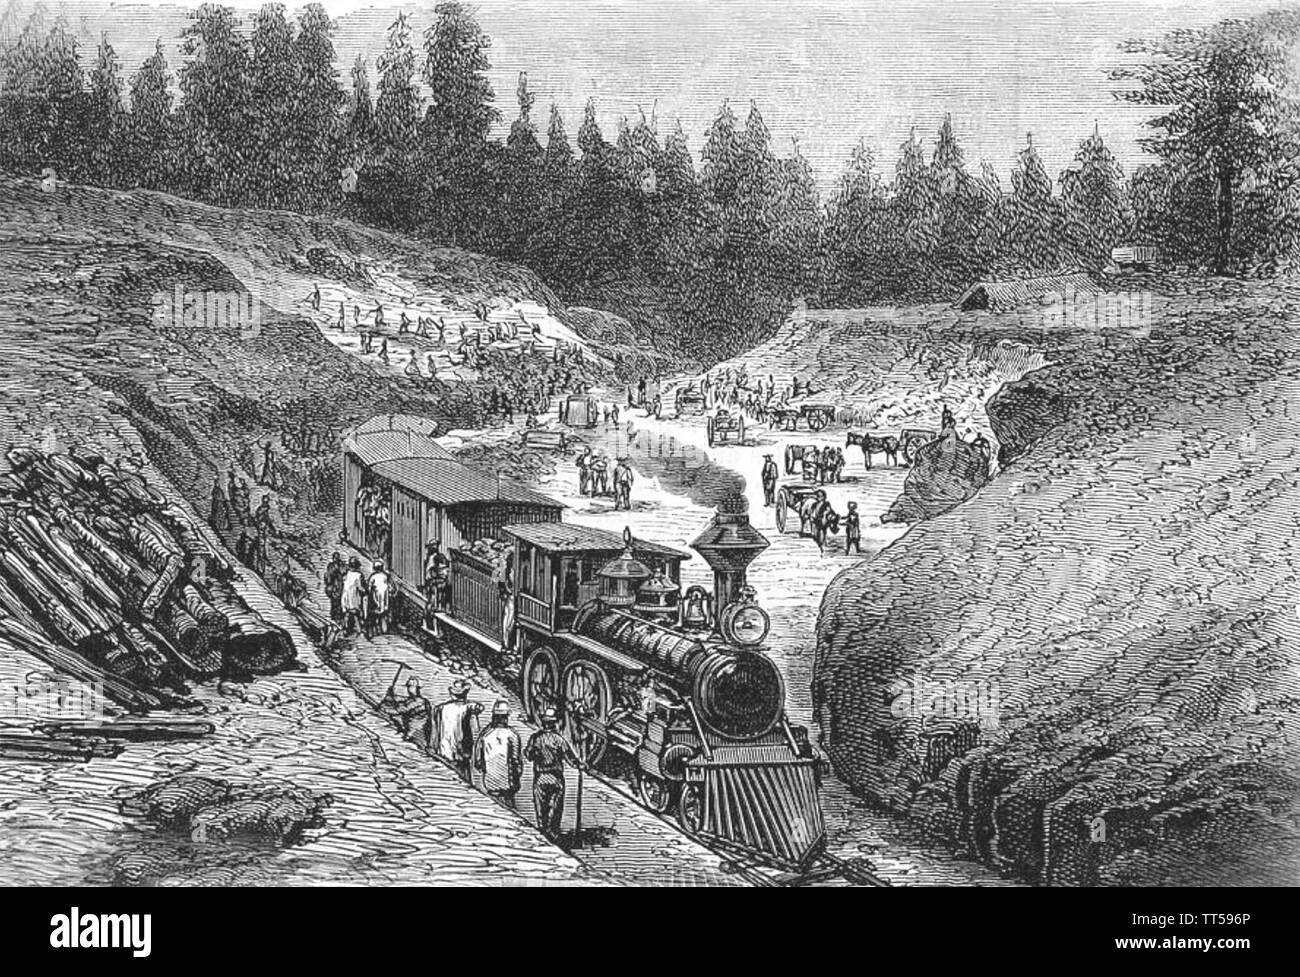 PACIFIC RAILROAD The inaugural run of a steam engine on 9 December 1852 while the line was still under construction Stock Photo